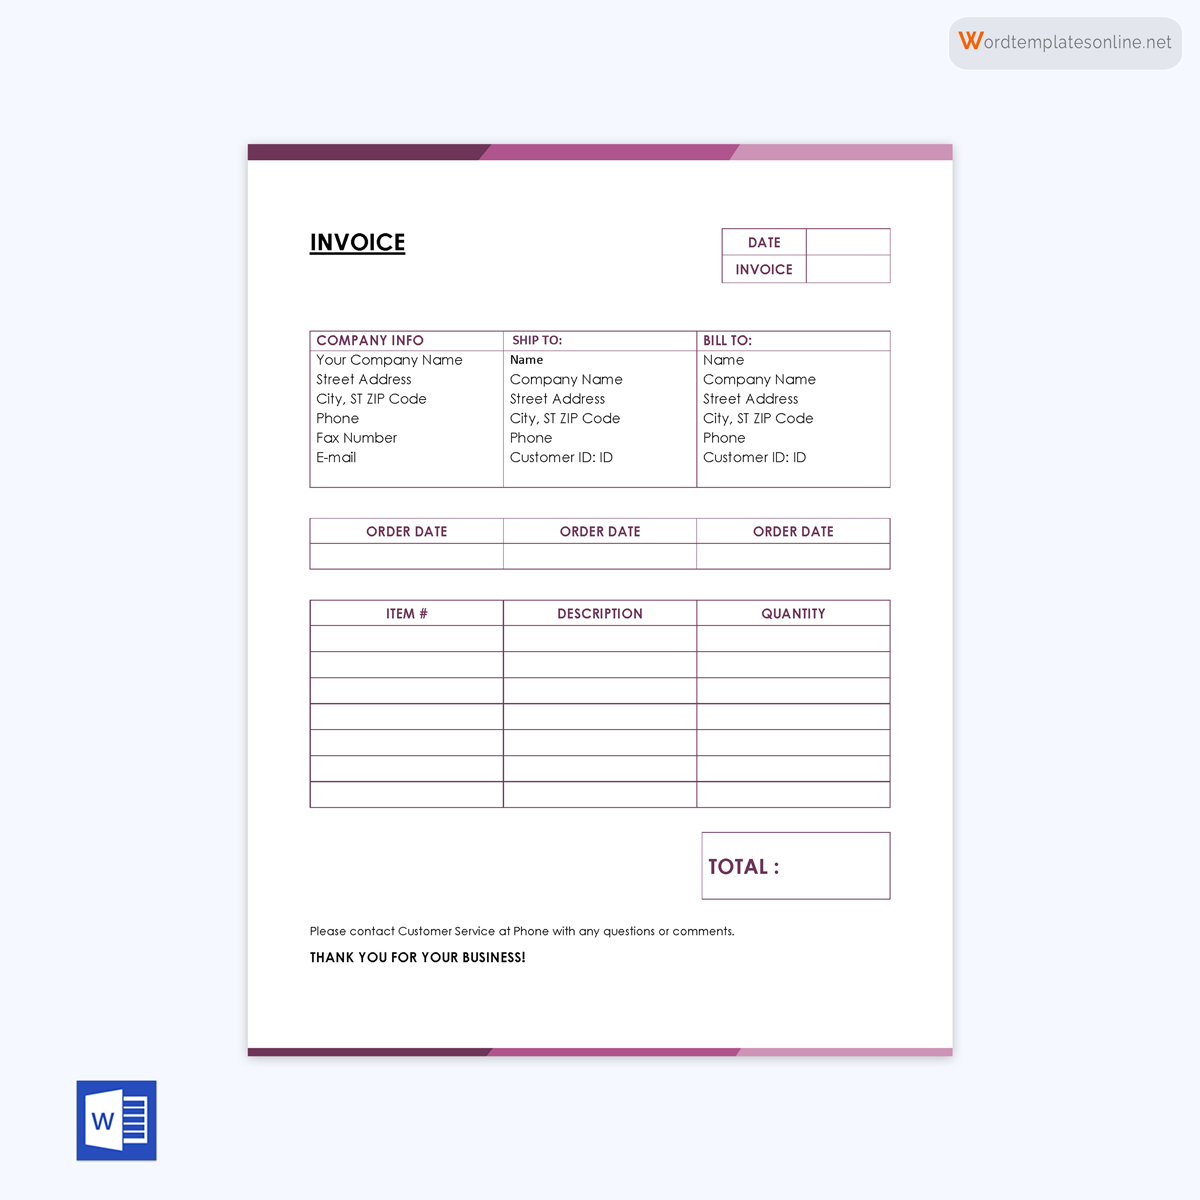 Editable invoice form example in word